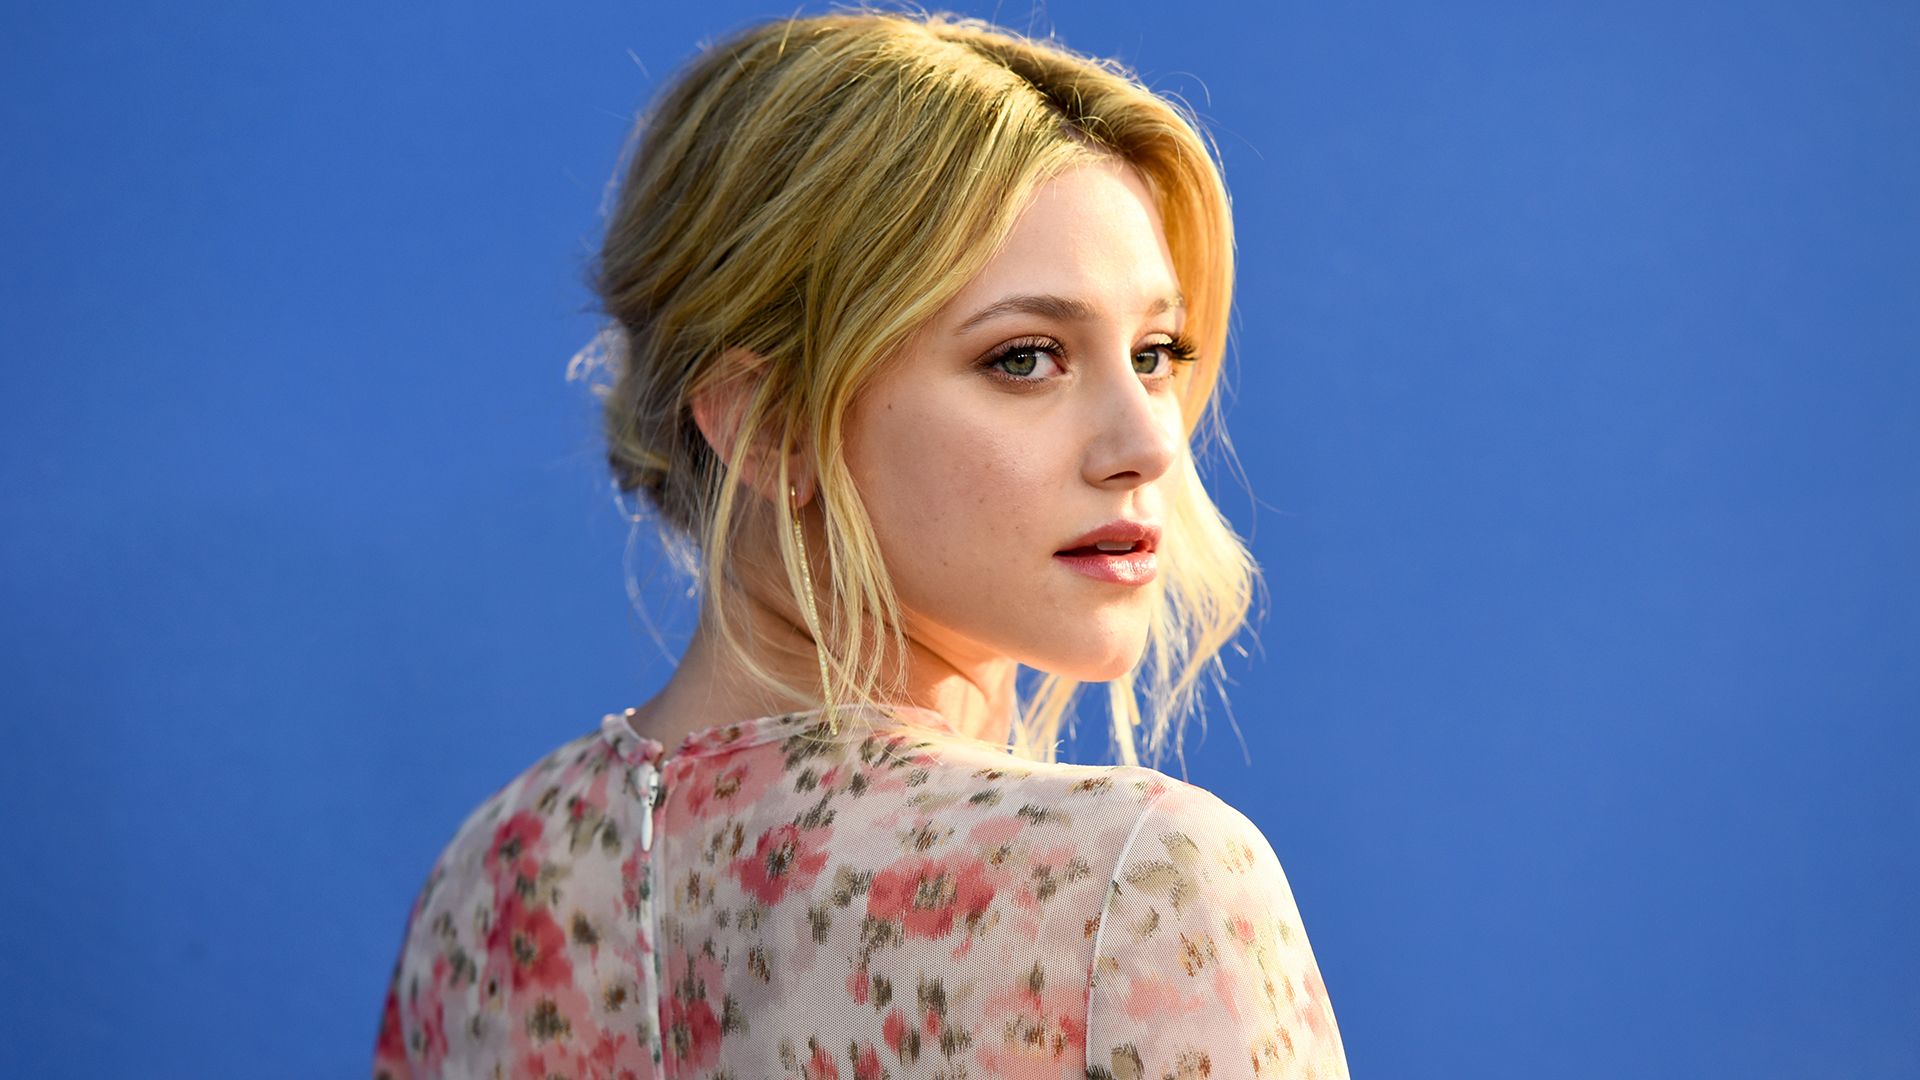 Lili Reinhart Is More Than Cole Sprouse's Girlfriend